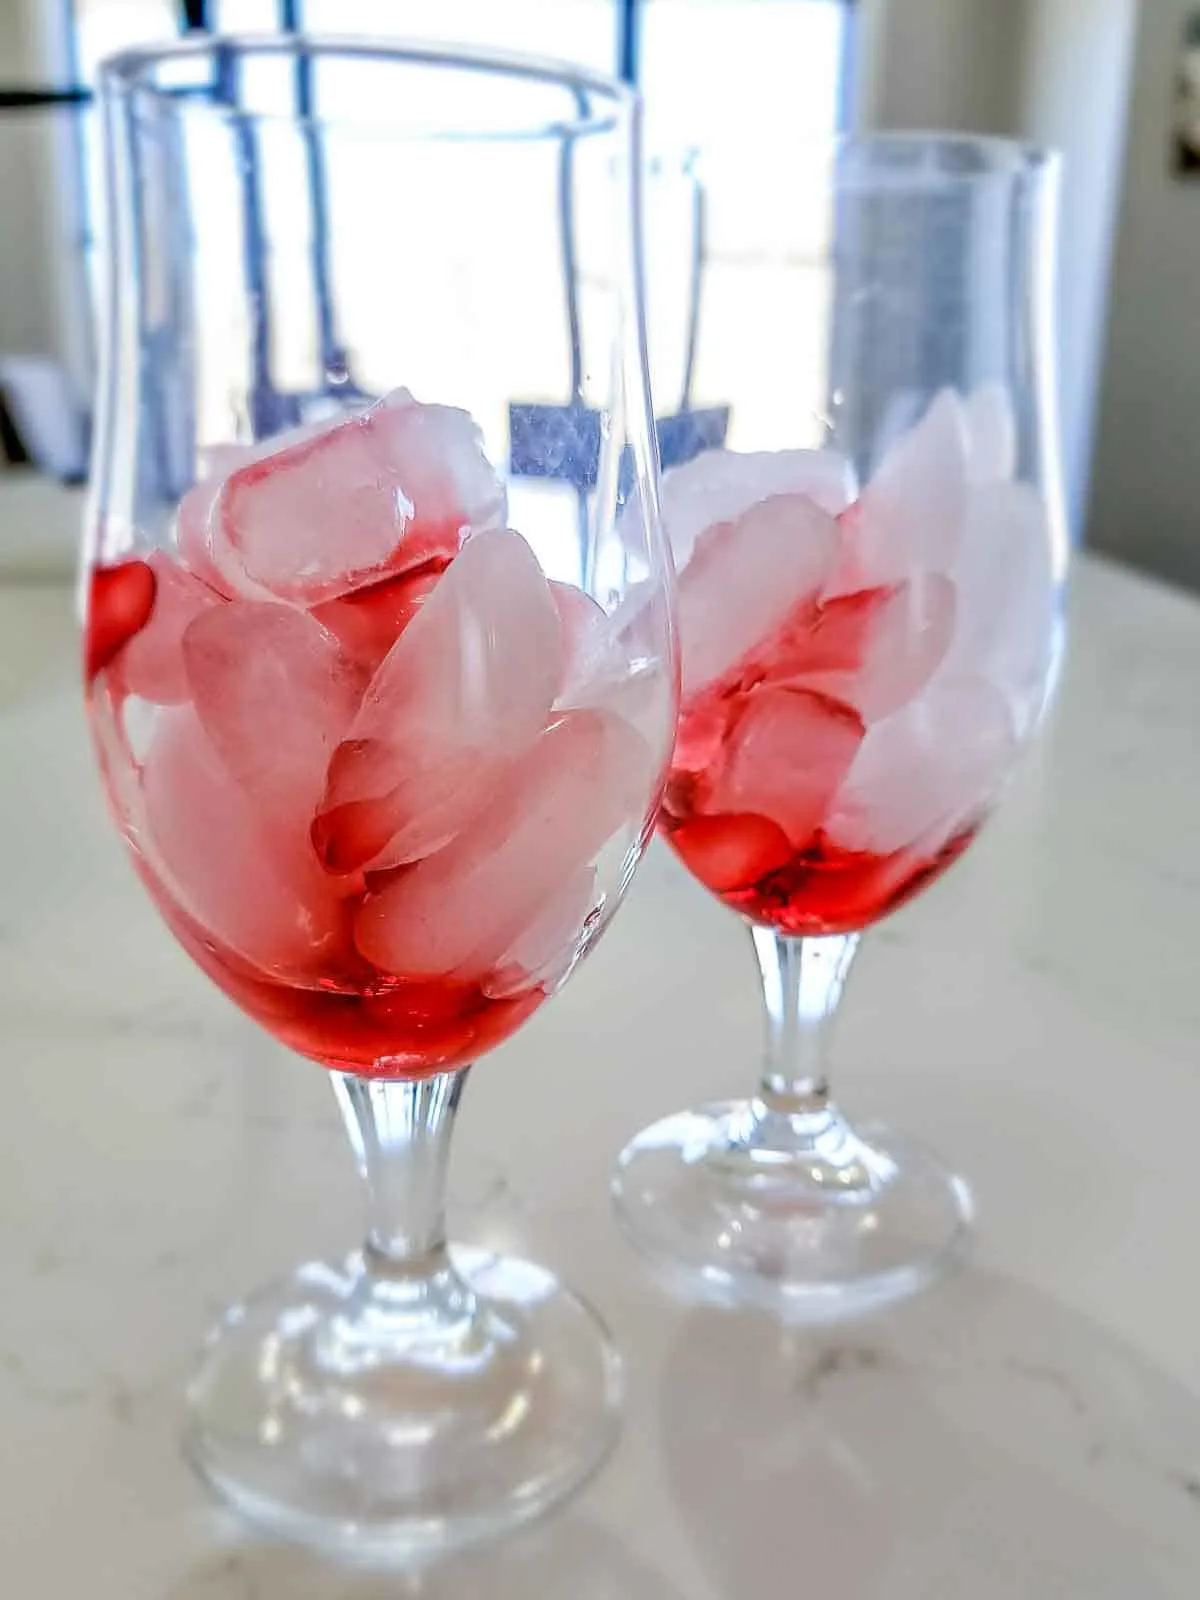 a glass filled with ice cubes and strawberry syrup.